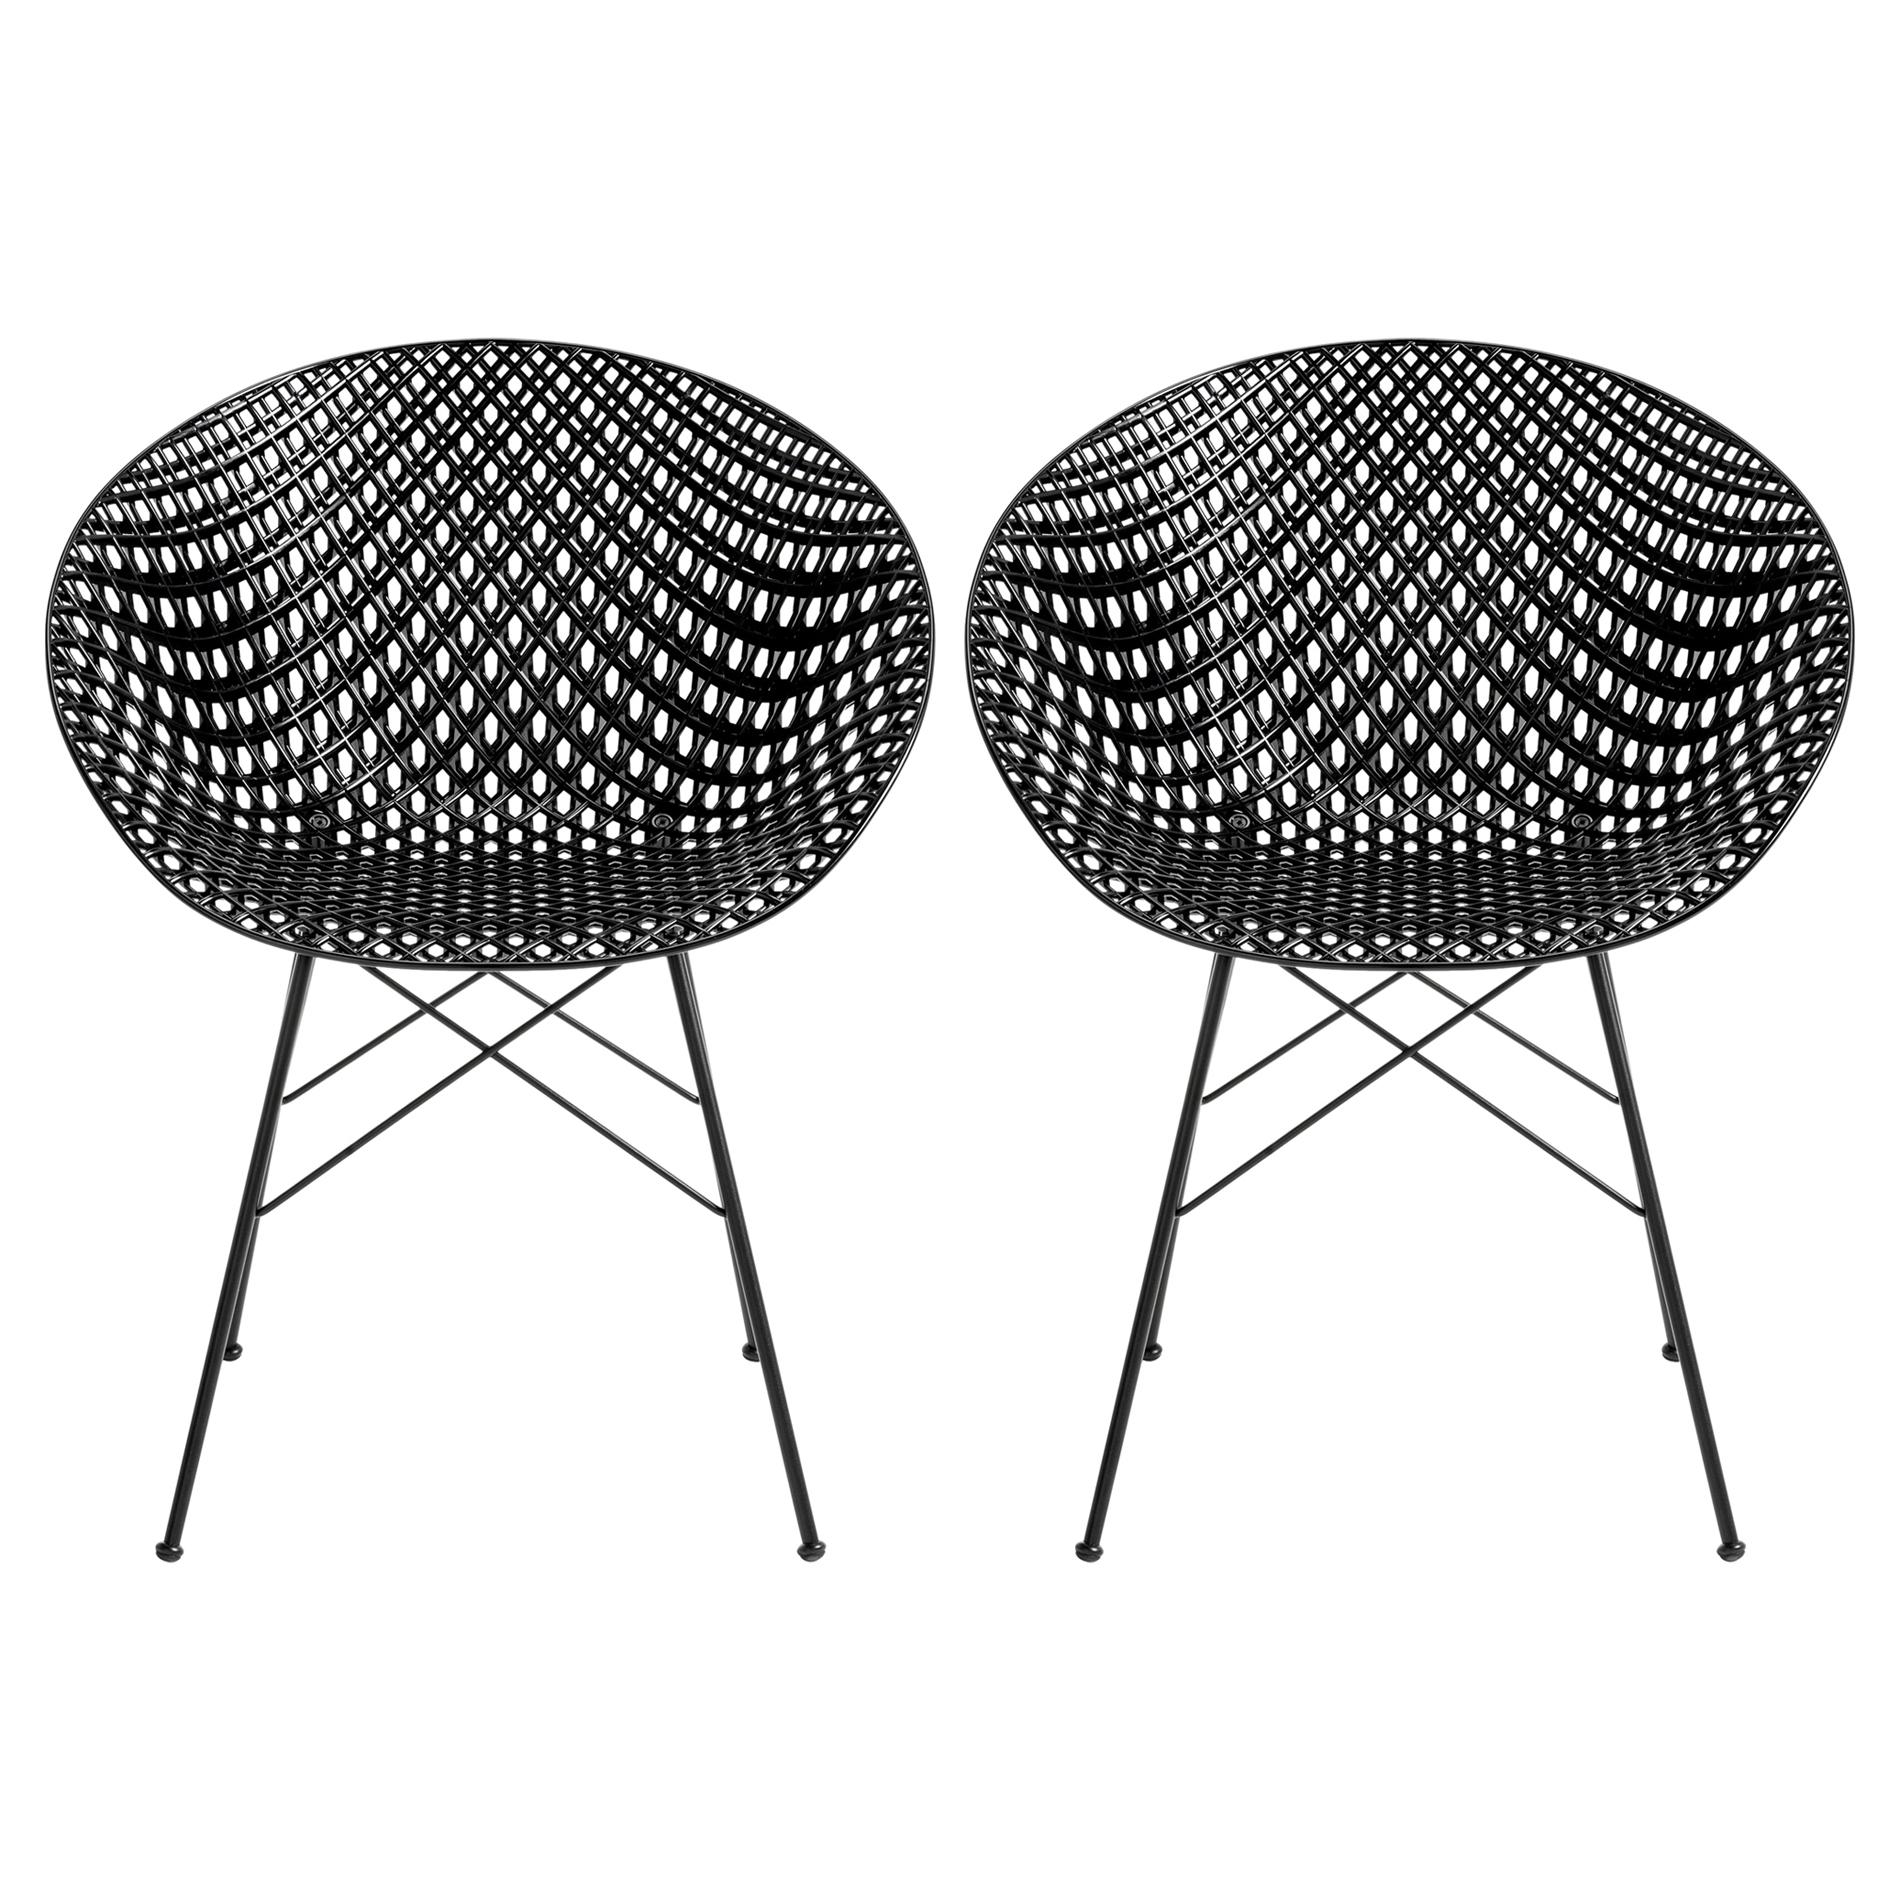 Set of 2 Kartell Smatrik Outdoor Chair in Black by Tokujin Yoshioka For Sale